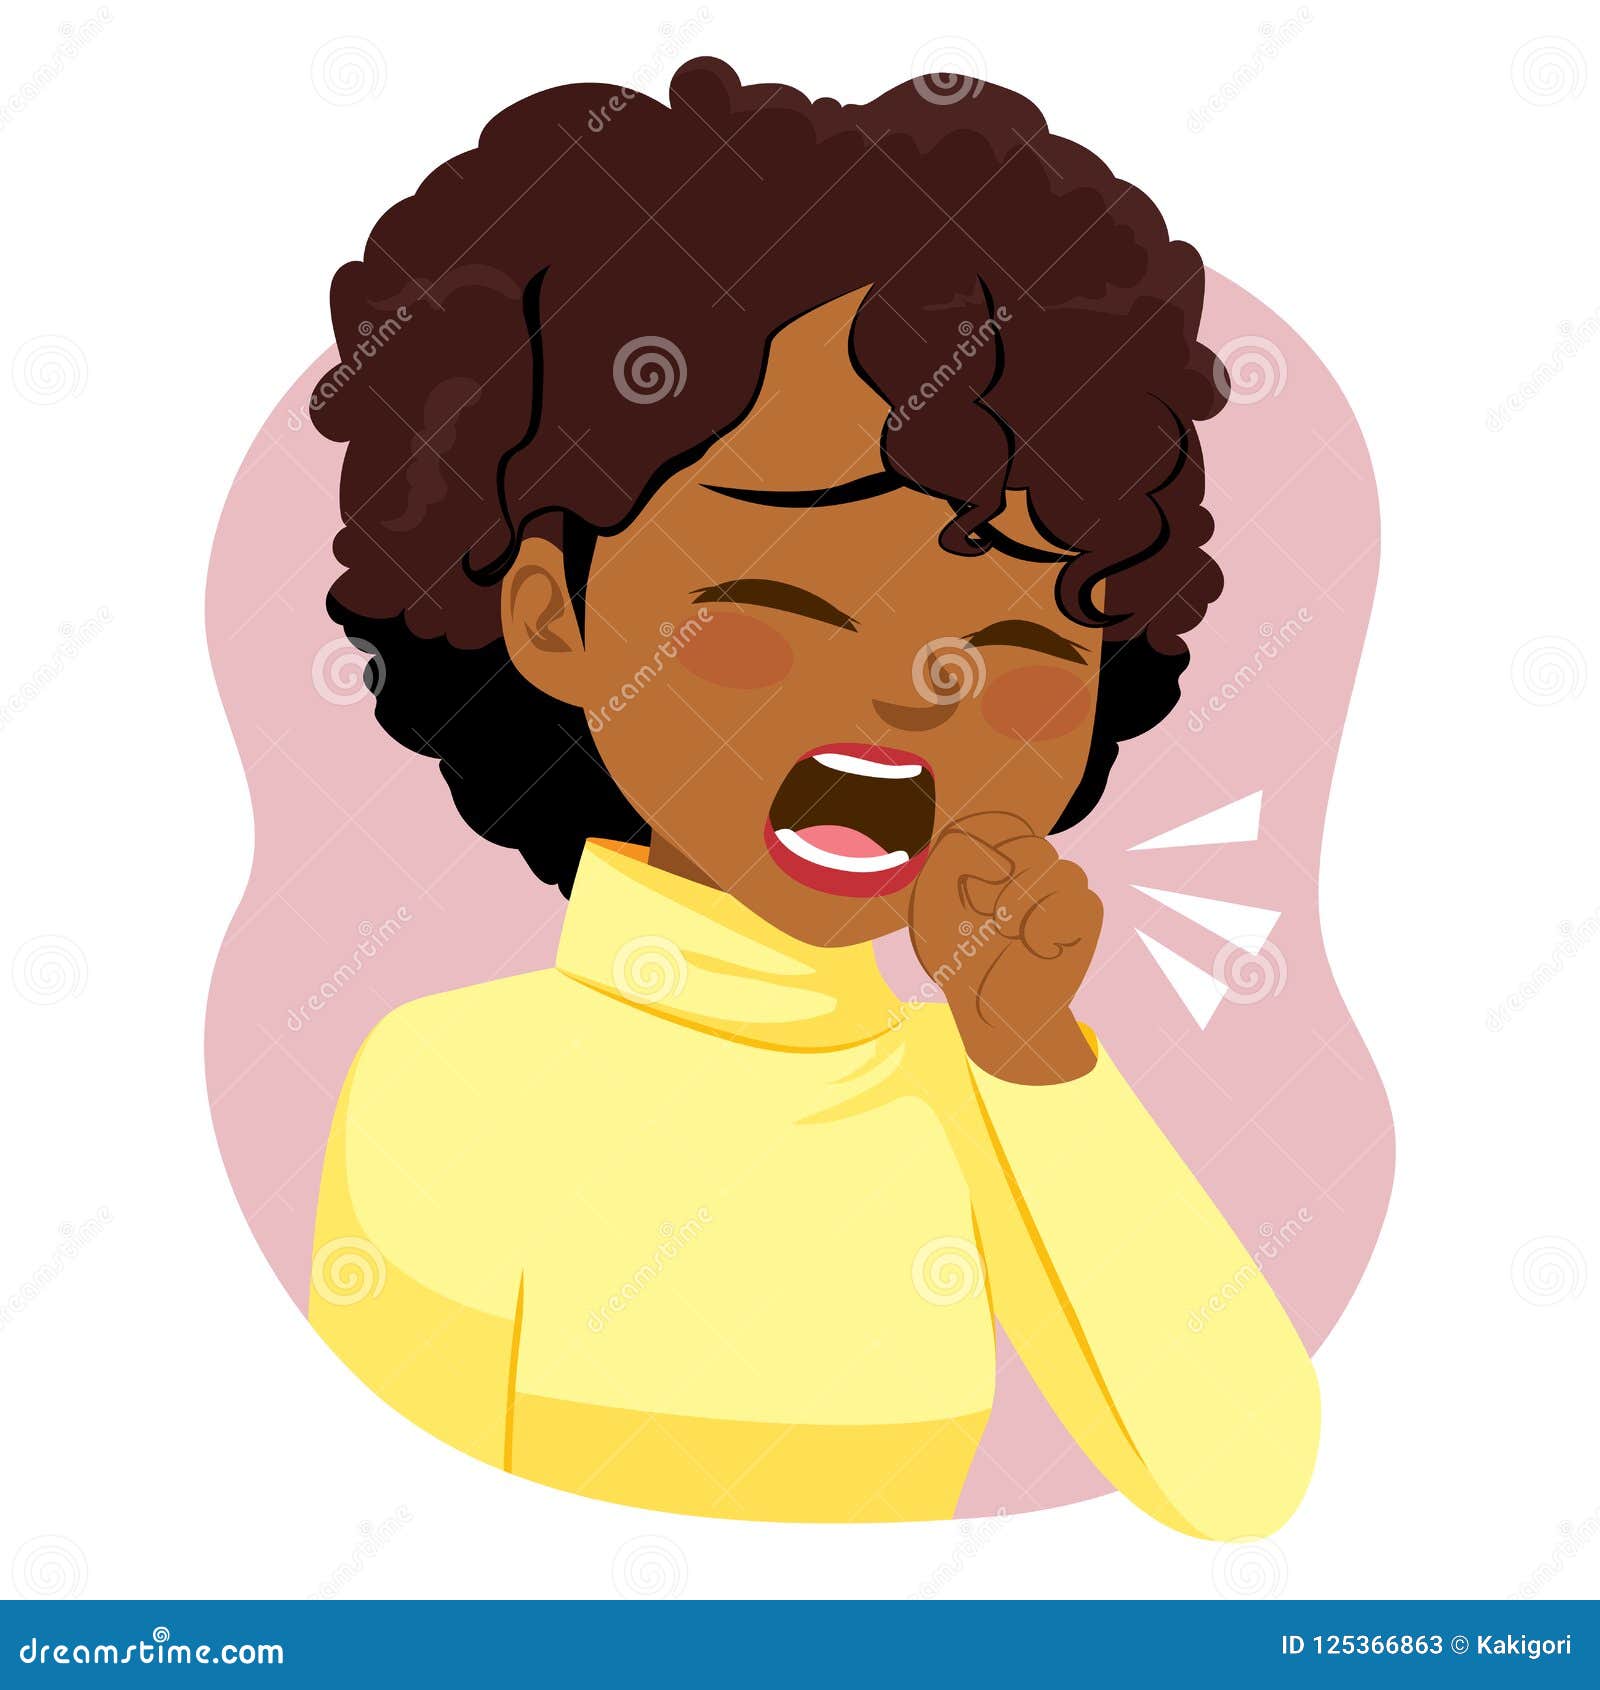 Sick Person Coughing Clipart